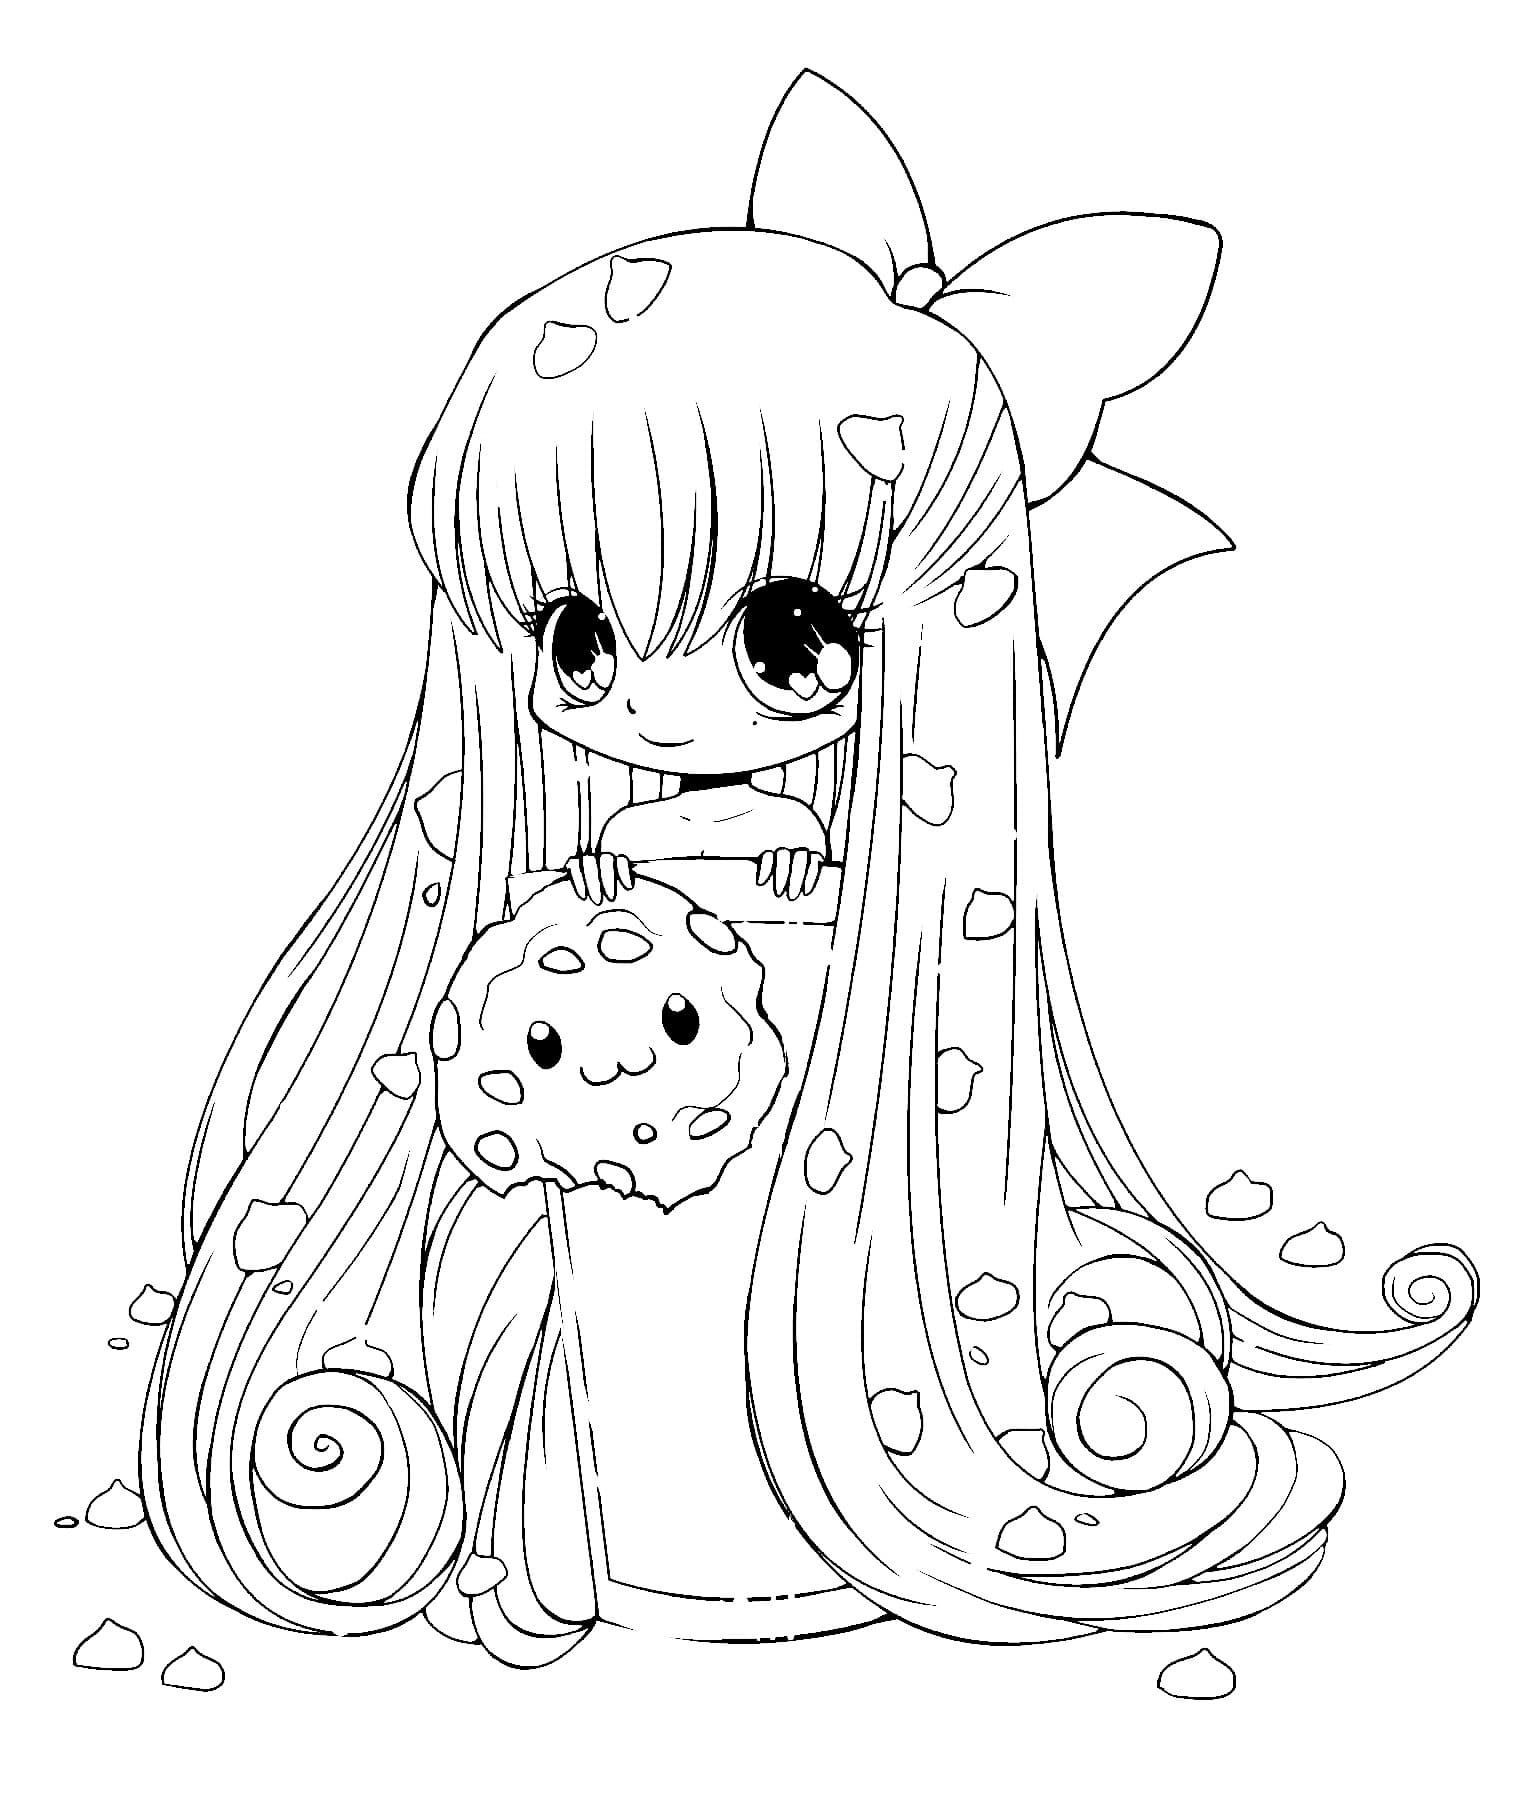 Coloring page Chibi A girl and a cookie